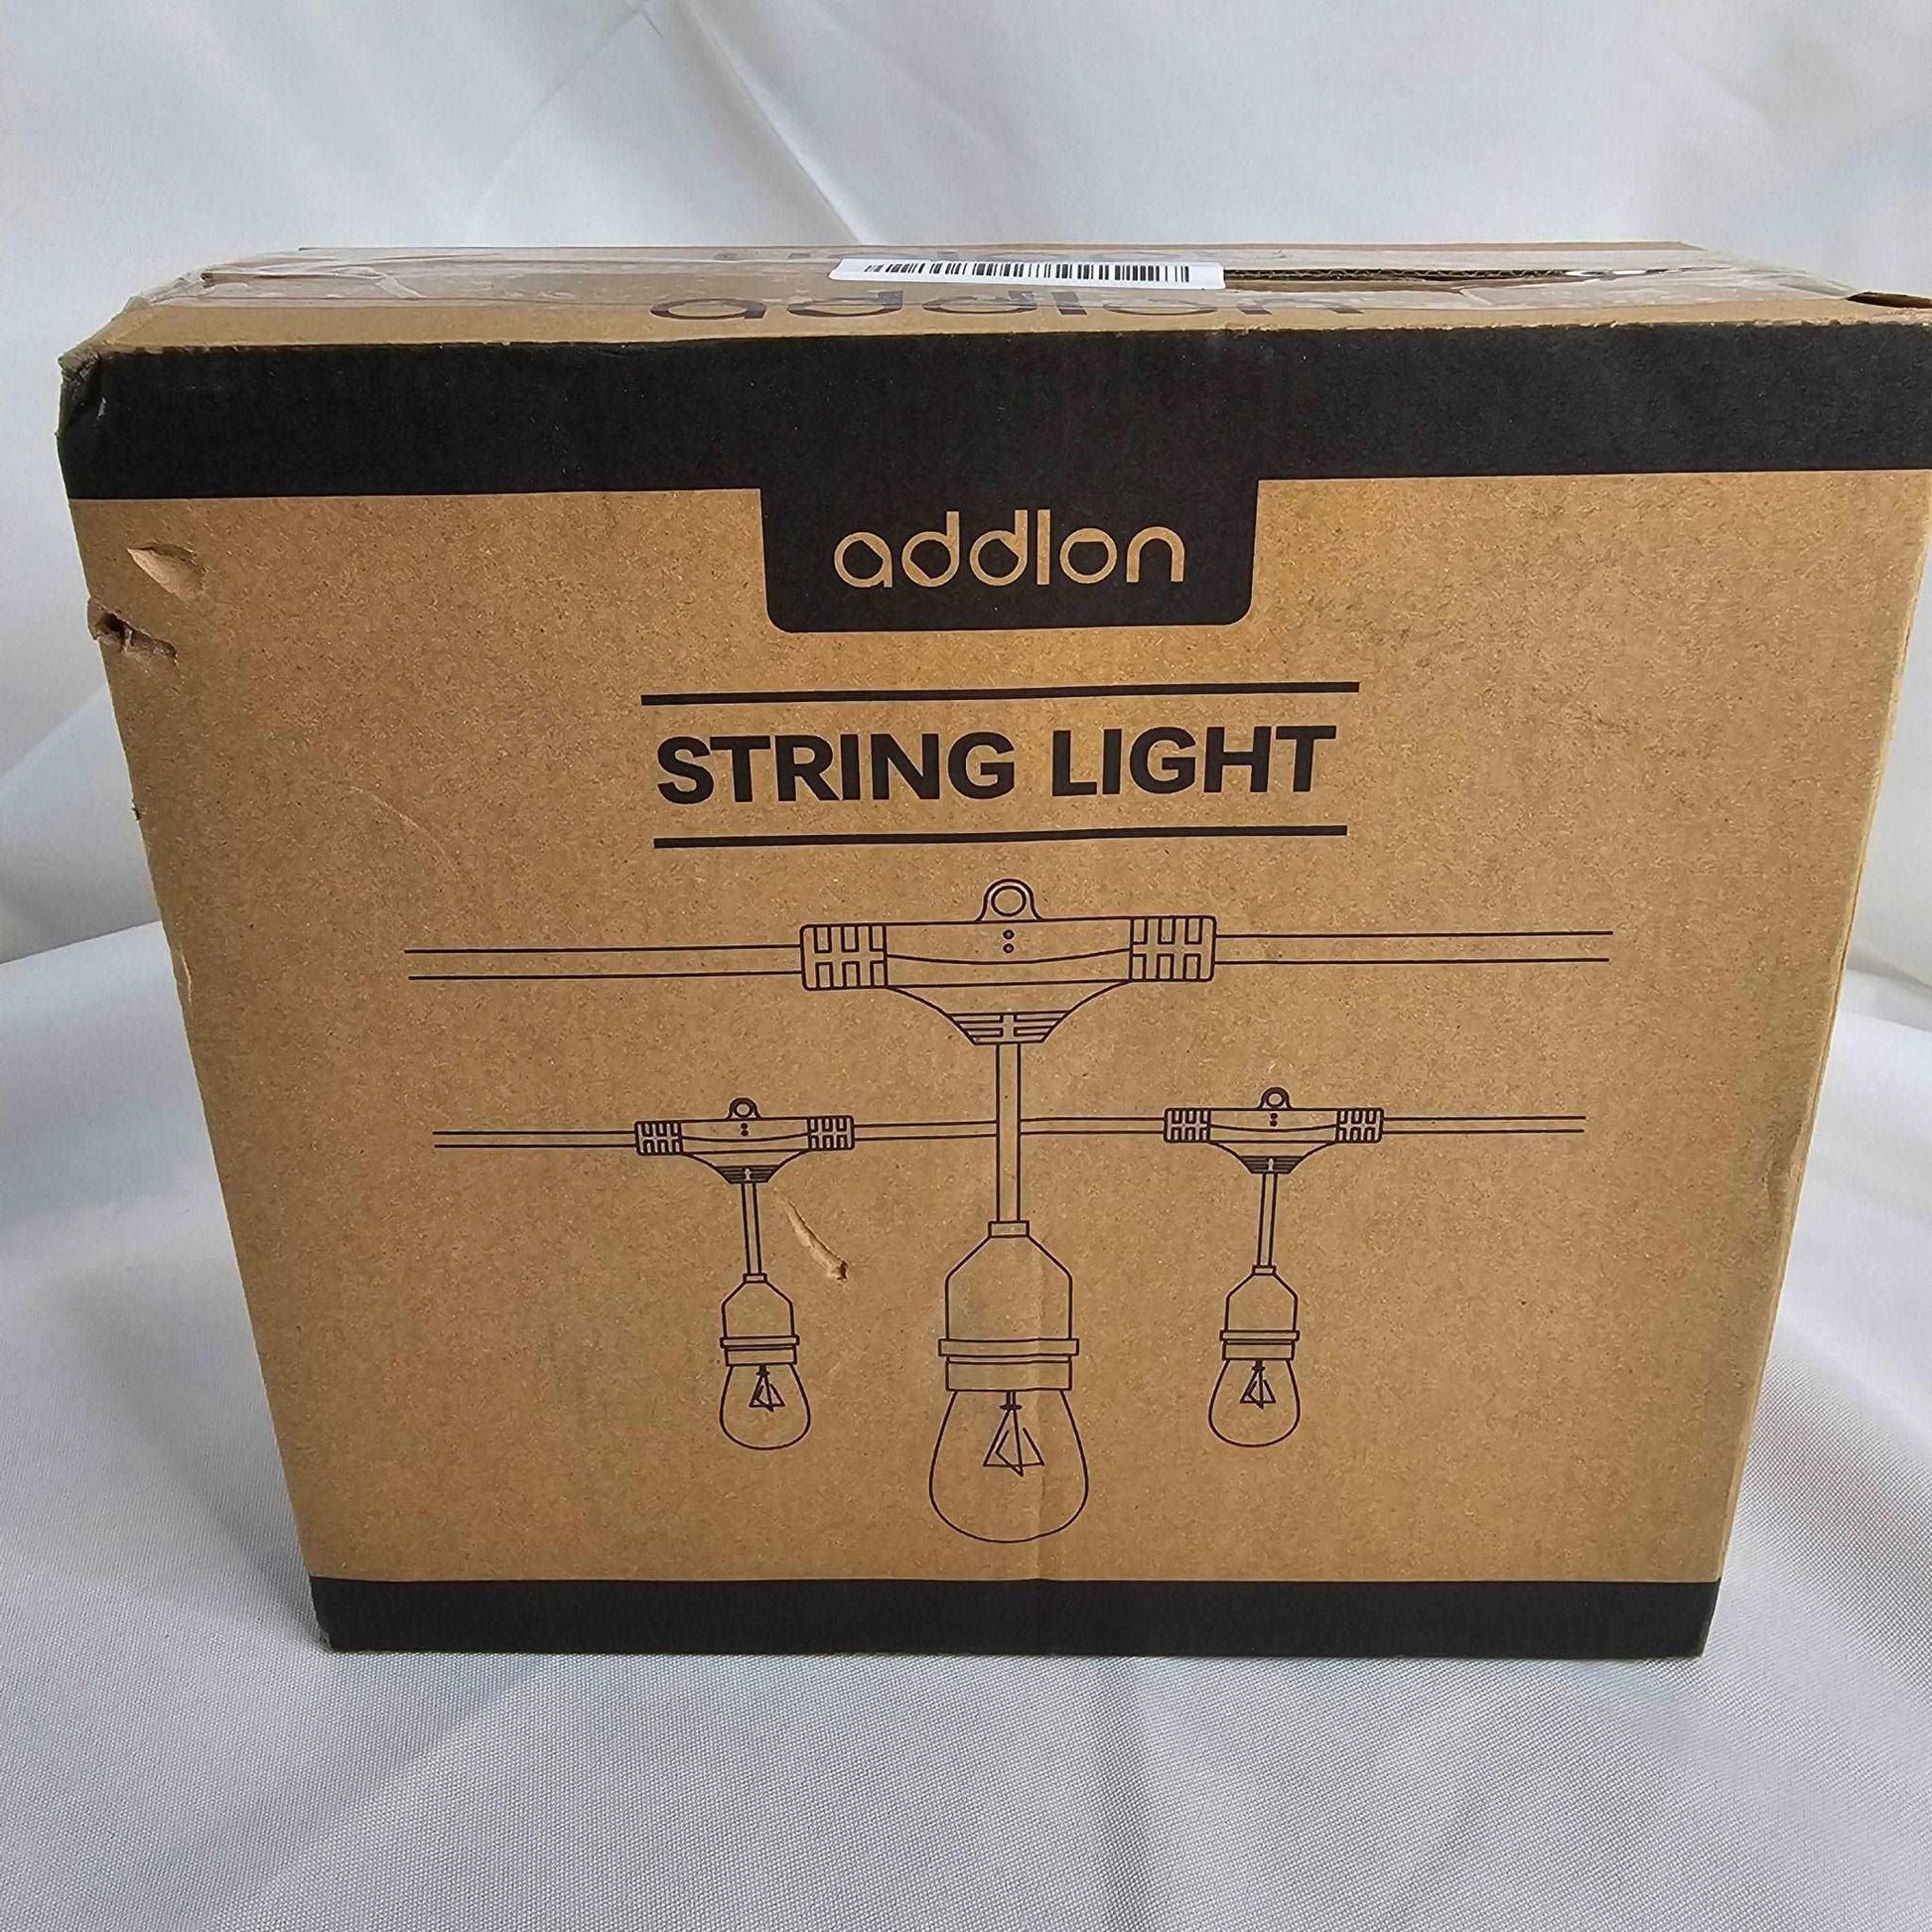 24ft Heavy-Duty String Lights - Waterproof, Connectable, 8 Sockets - DQ Distribution